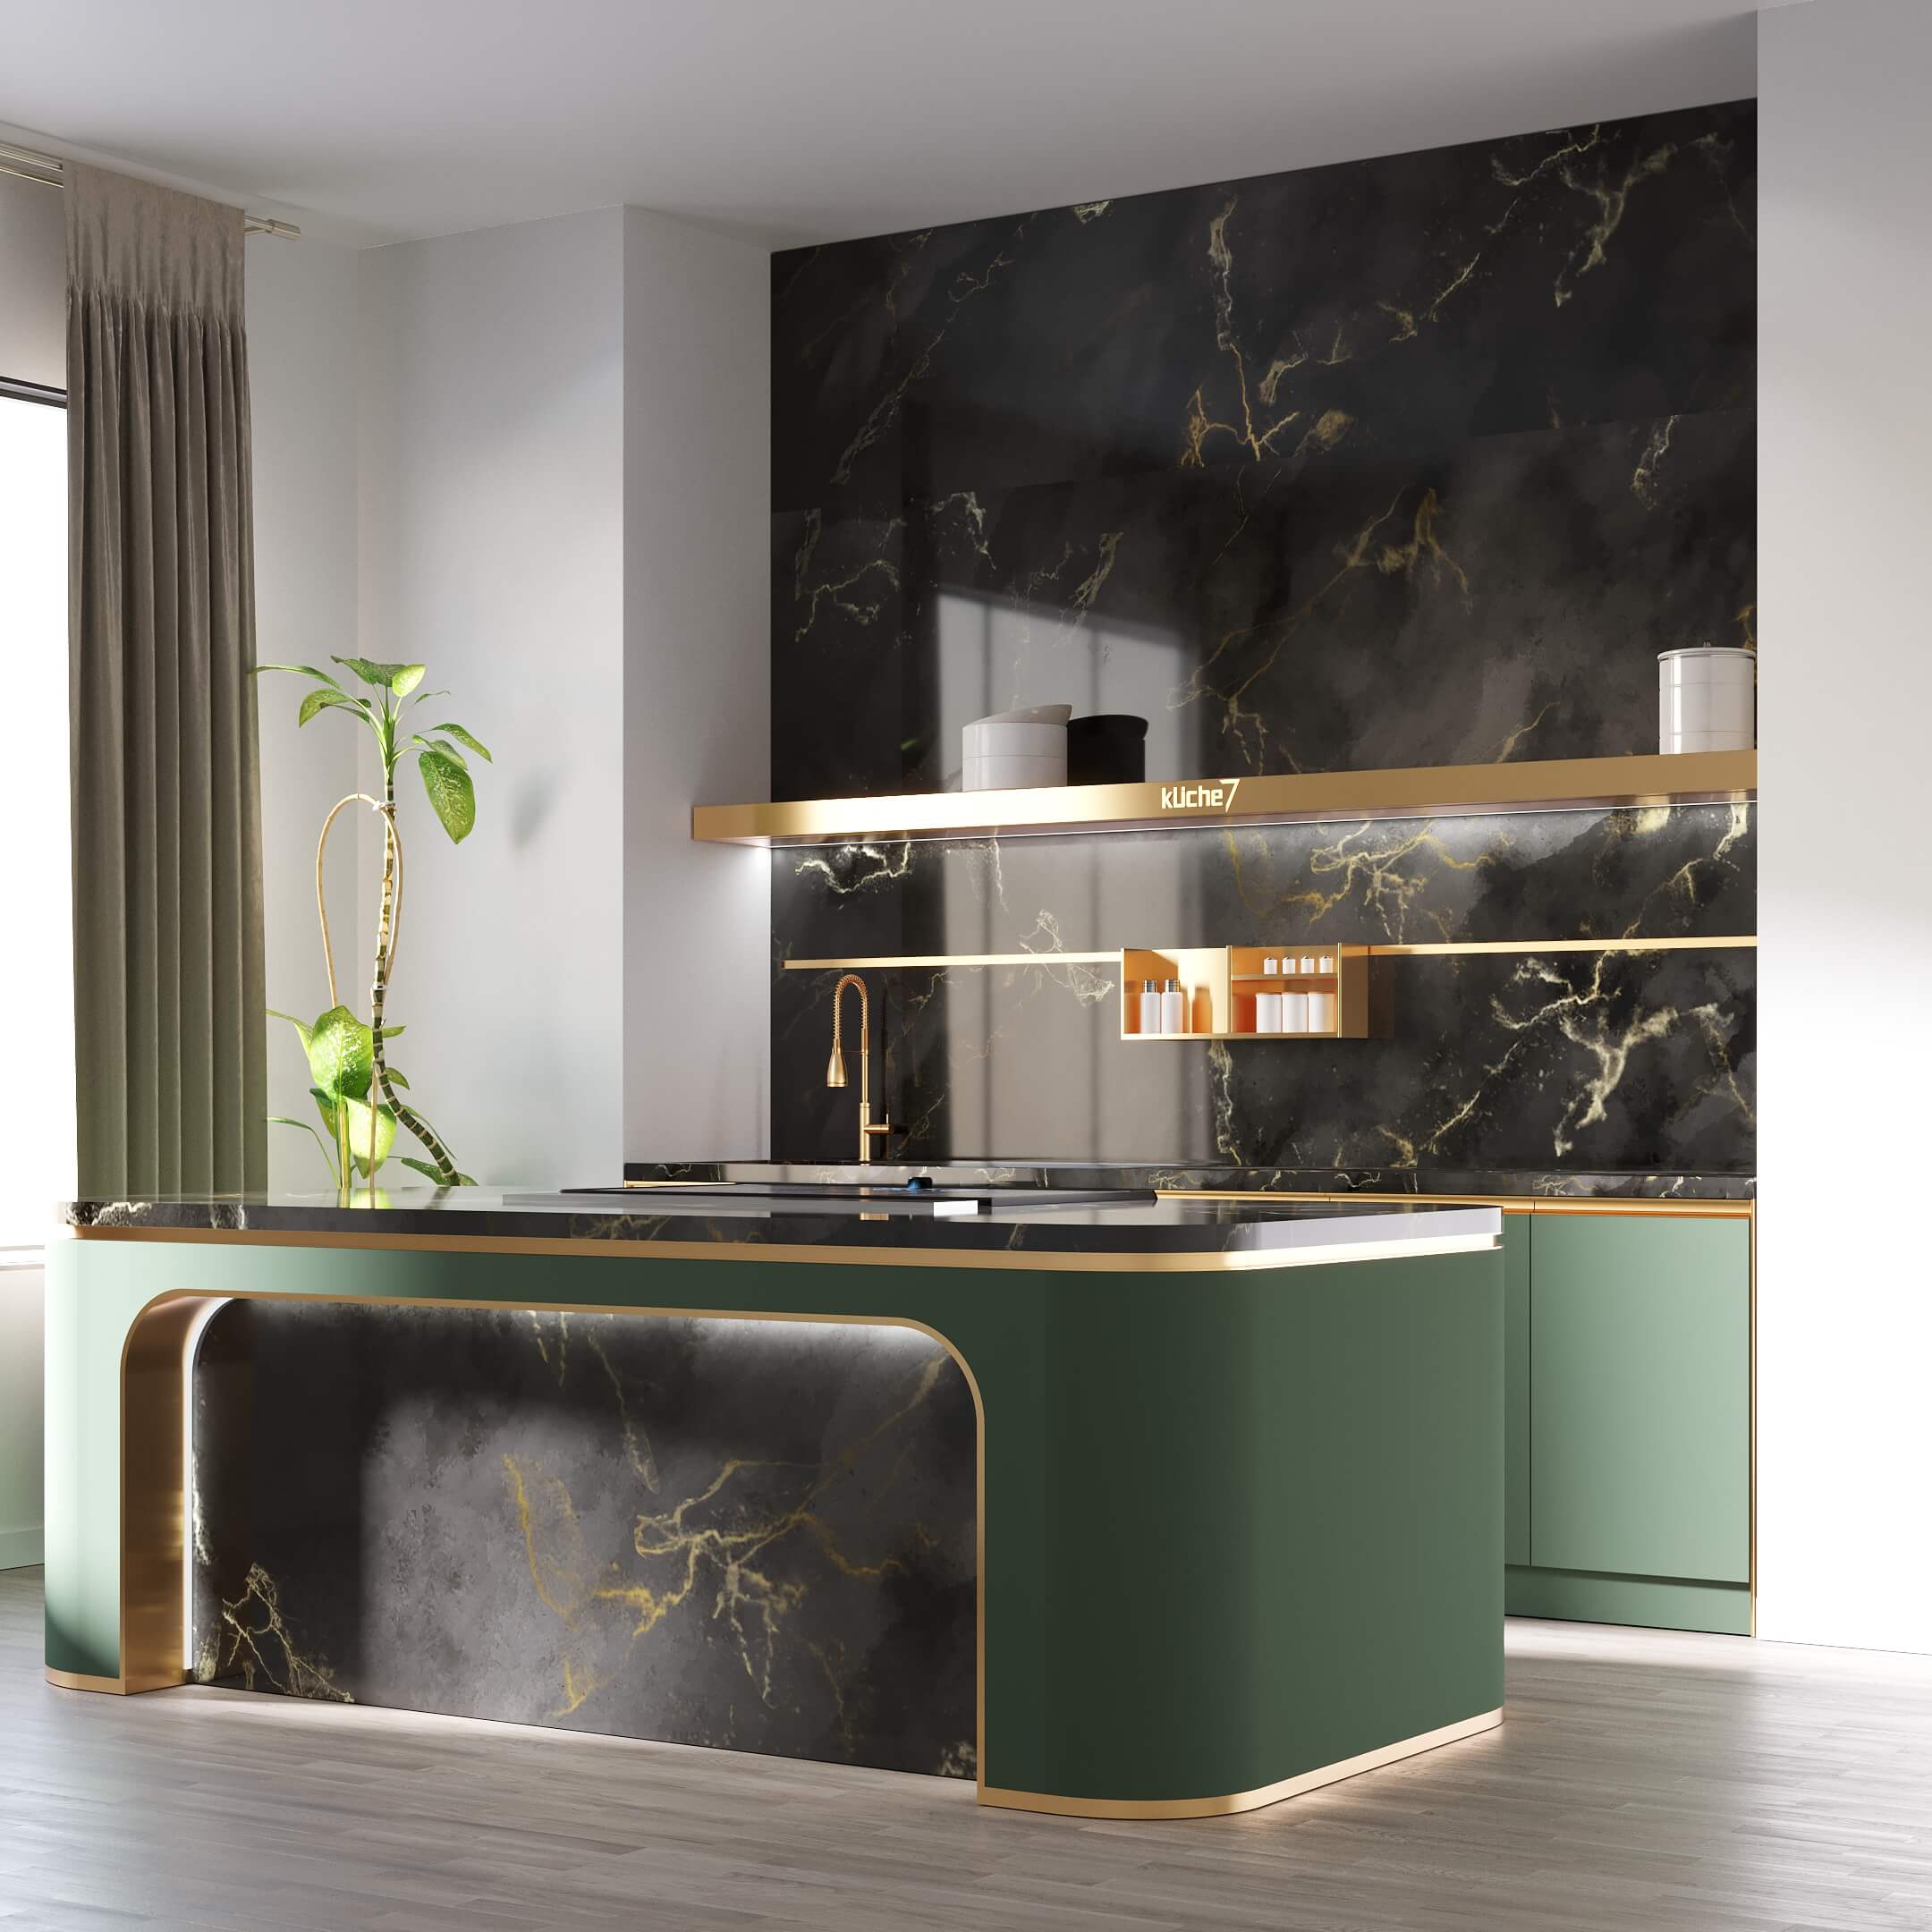 Marble counter kitchen